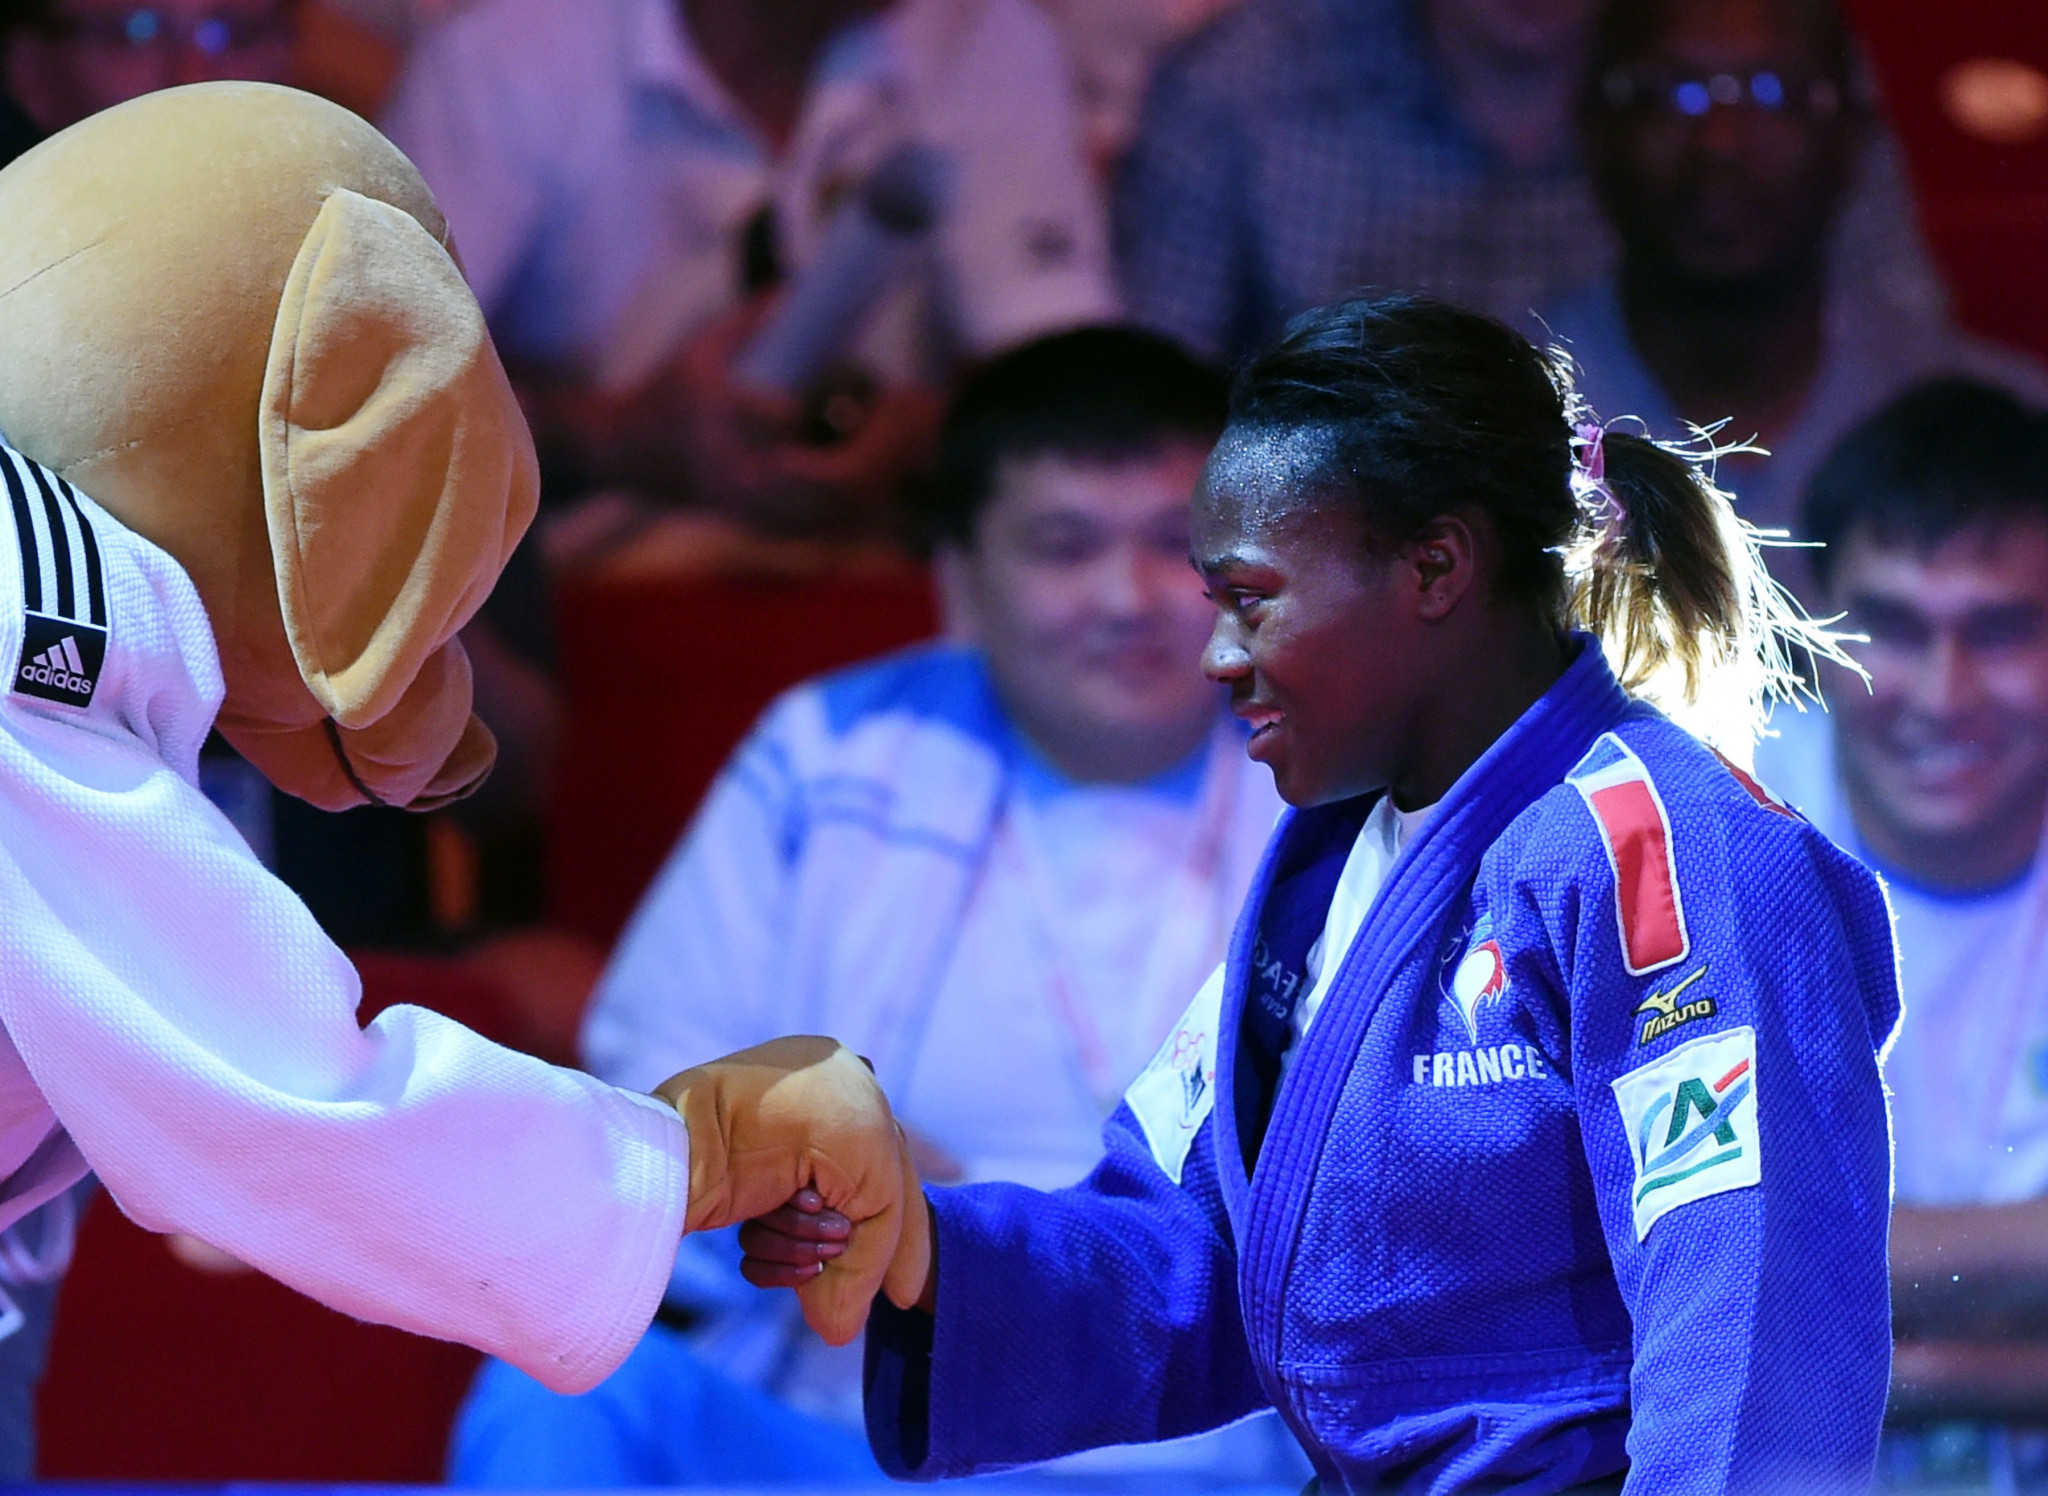 The French judoka produced a commanding display throughout the competition on her way to the top of the podium ©Getty Images